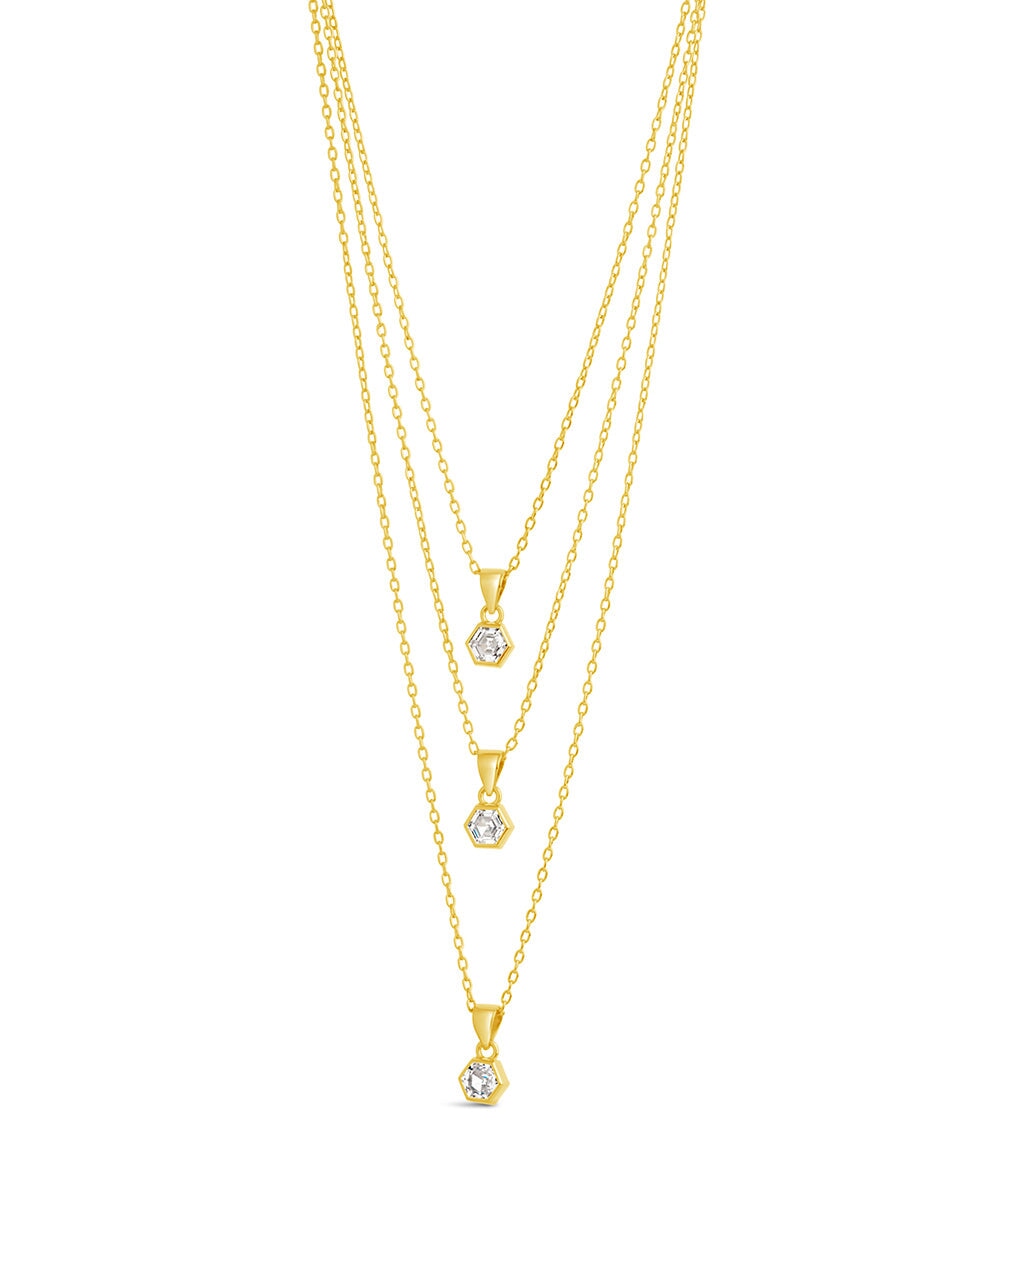 Gia Layered Necklace Necklace Sterling Forever Gold 